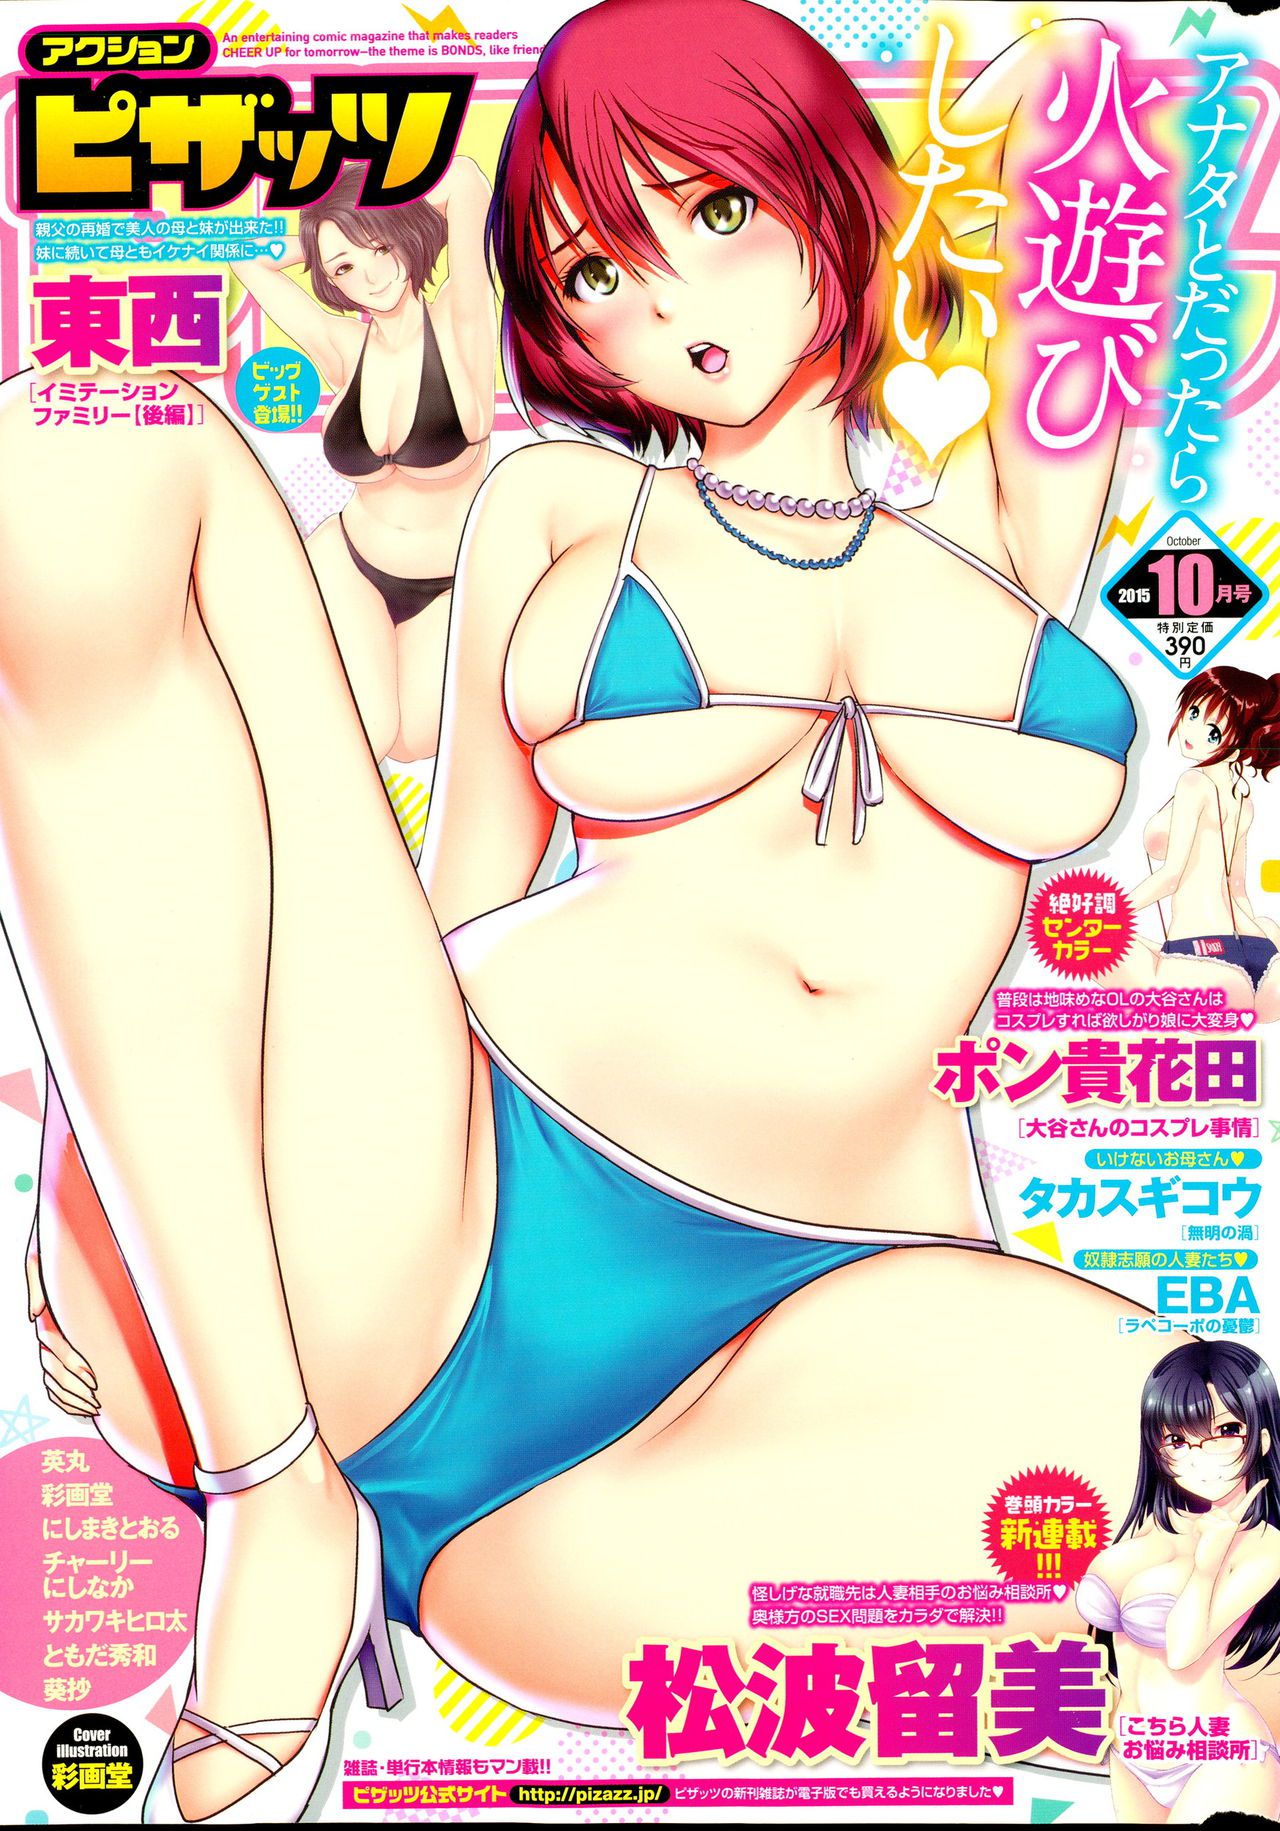 [Saigado] Cover Illustrations [彩画堂] Cover Illustrations 81